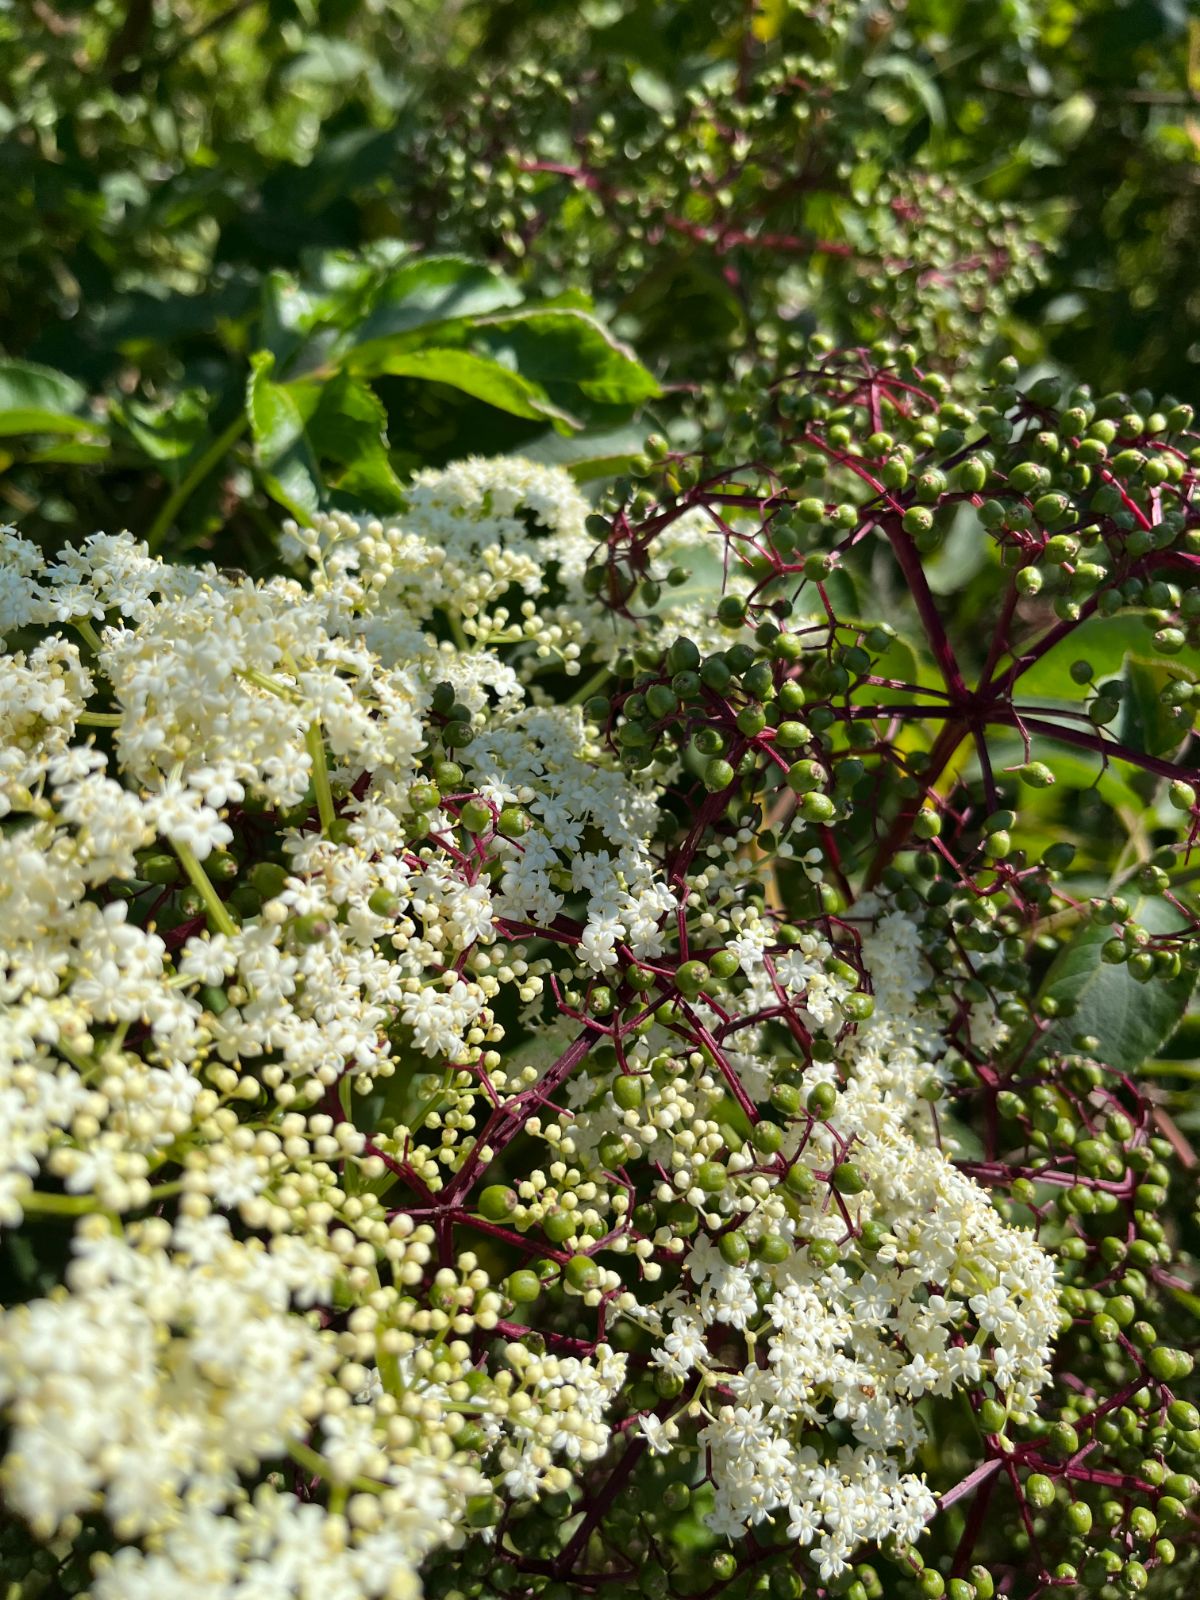 An elderberry with both green berries and flowers on it